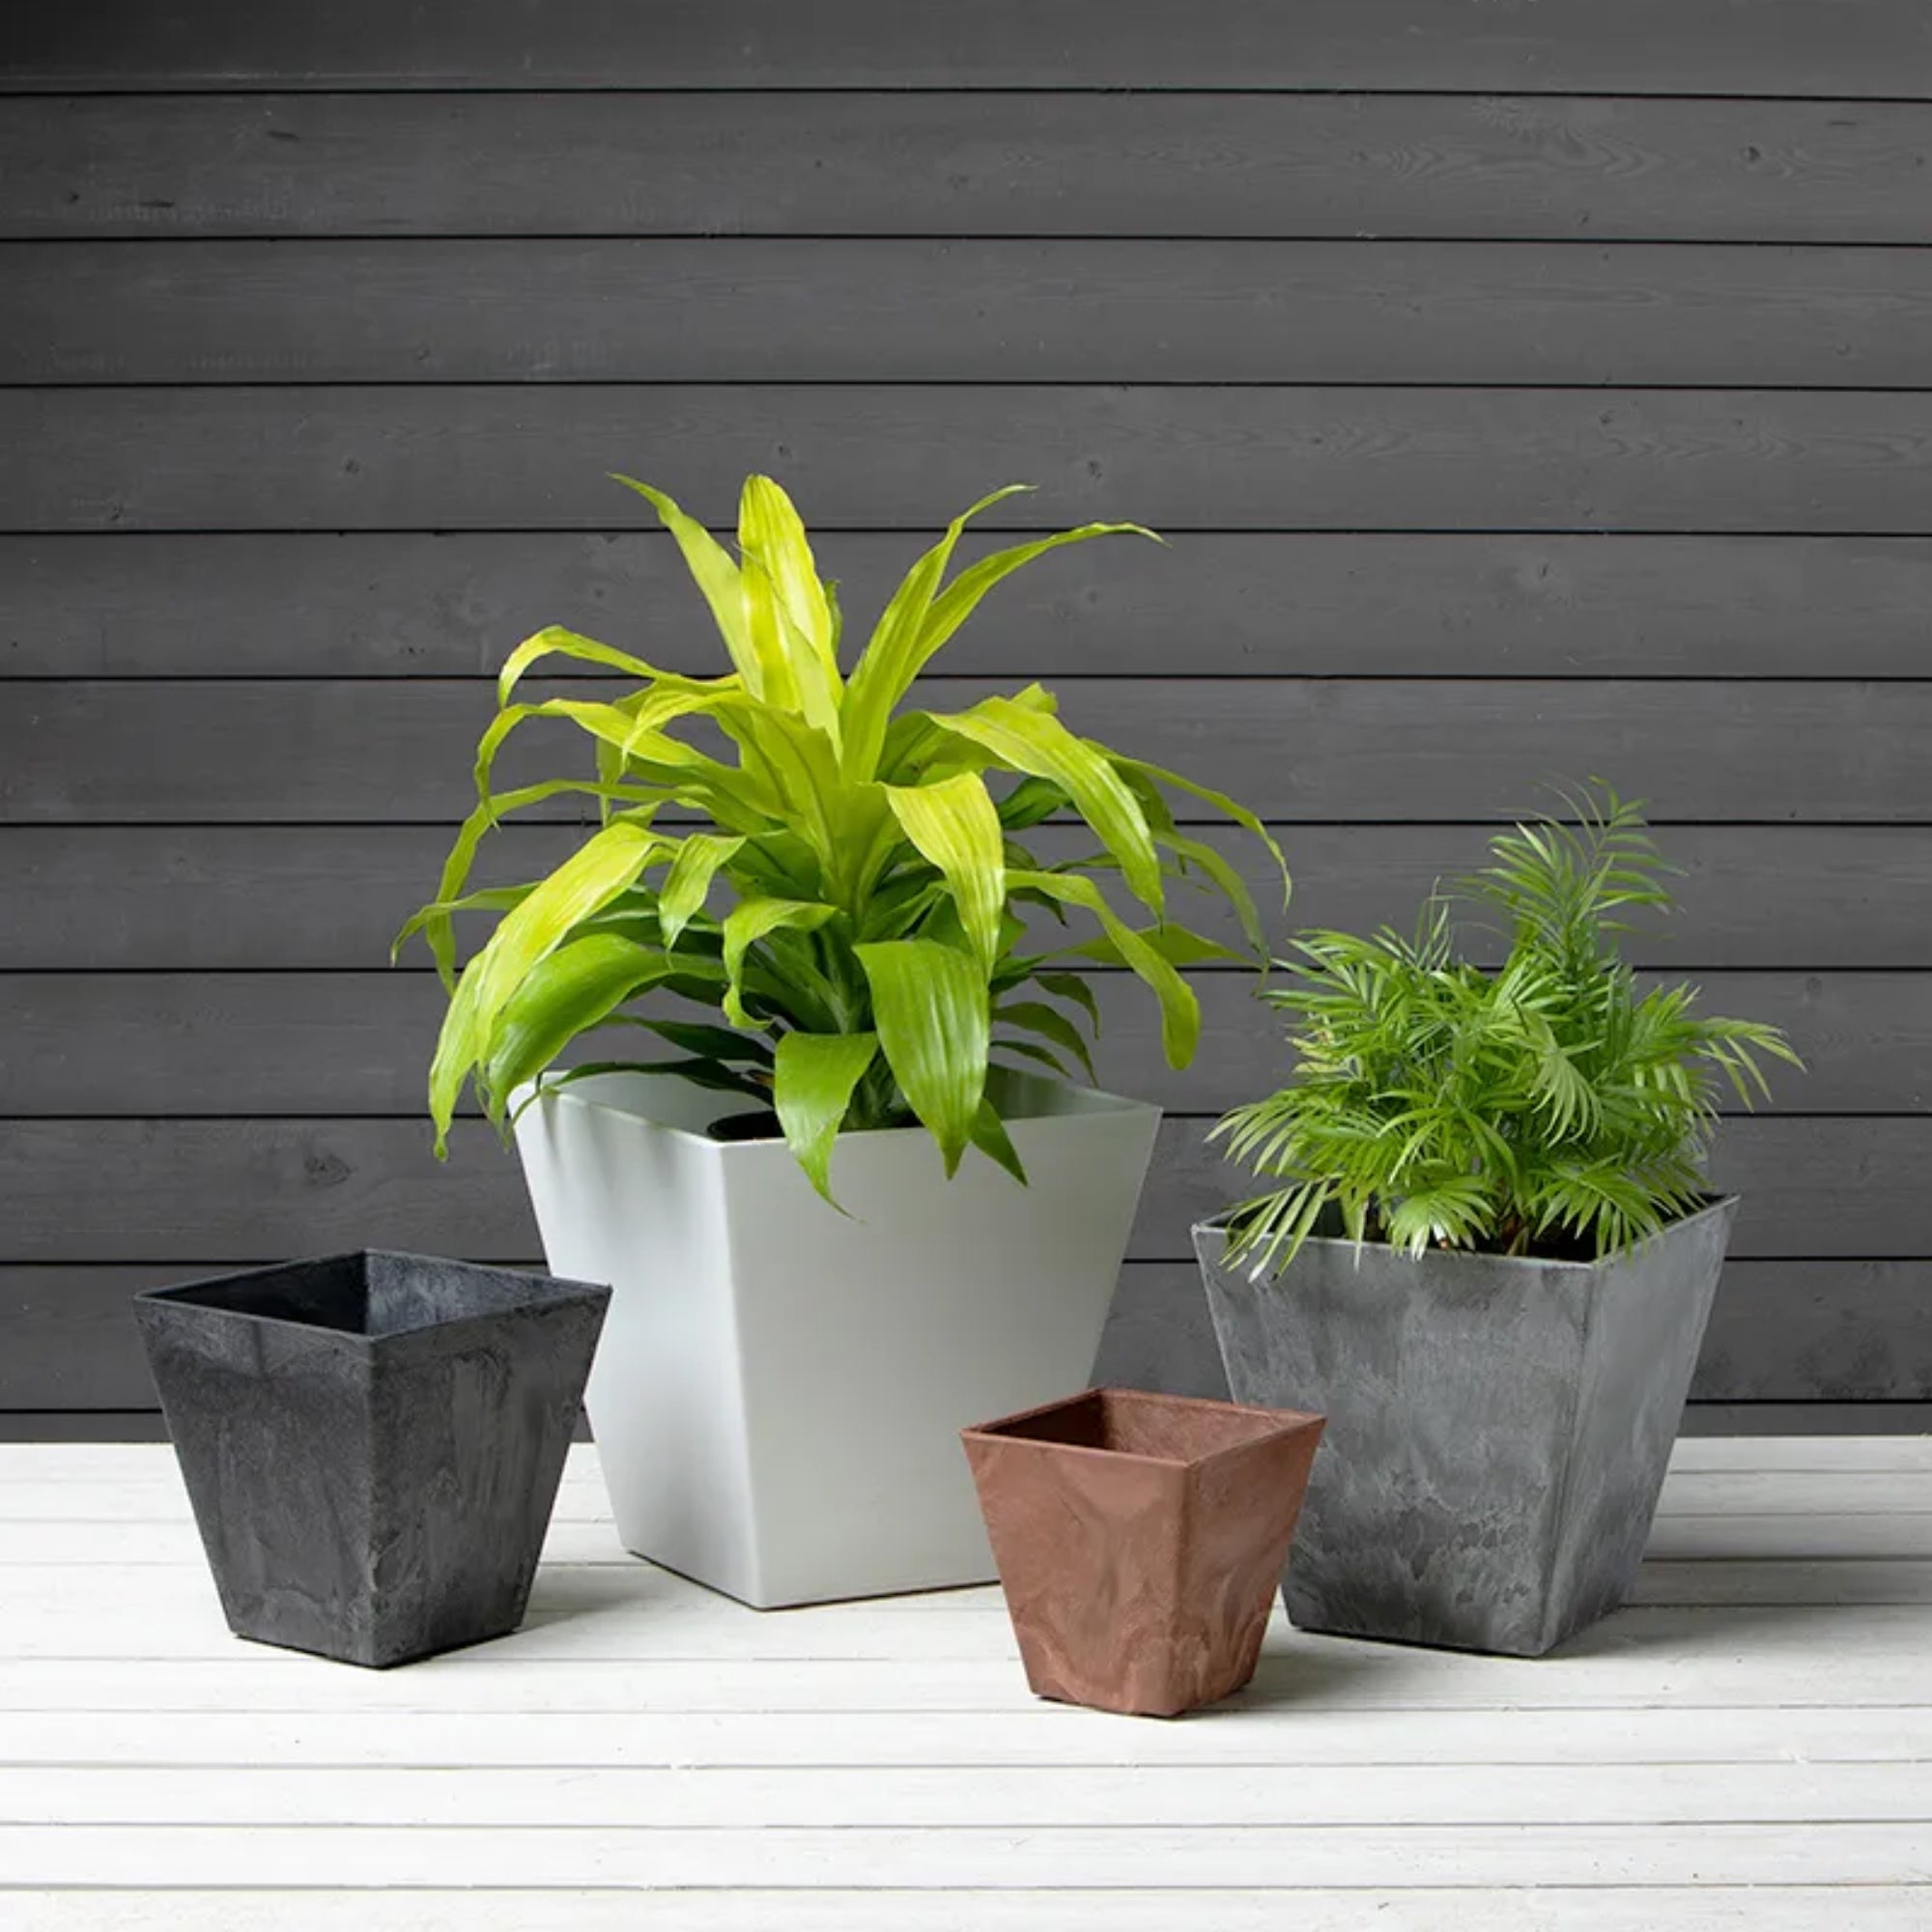 Novelty Artstone Square Ella Planters with Self-Watering System